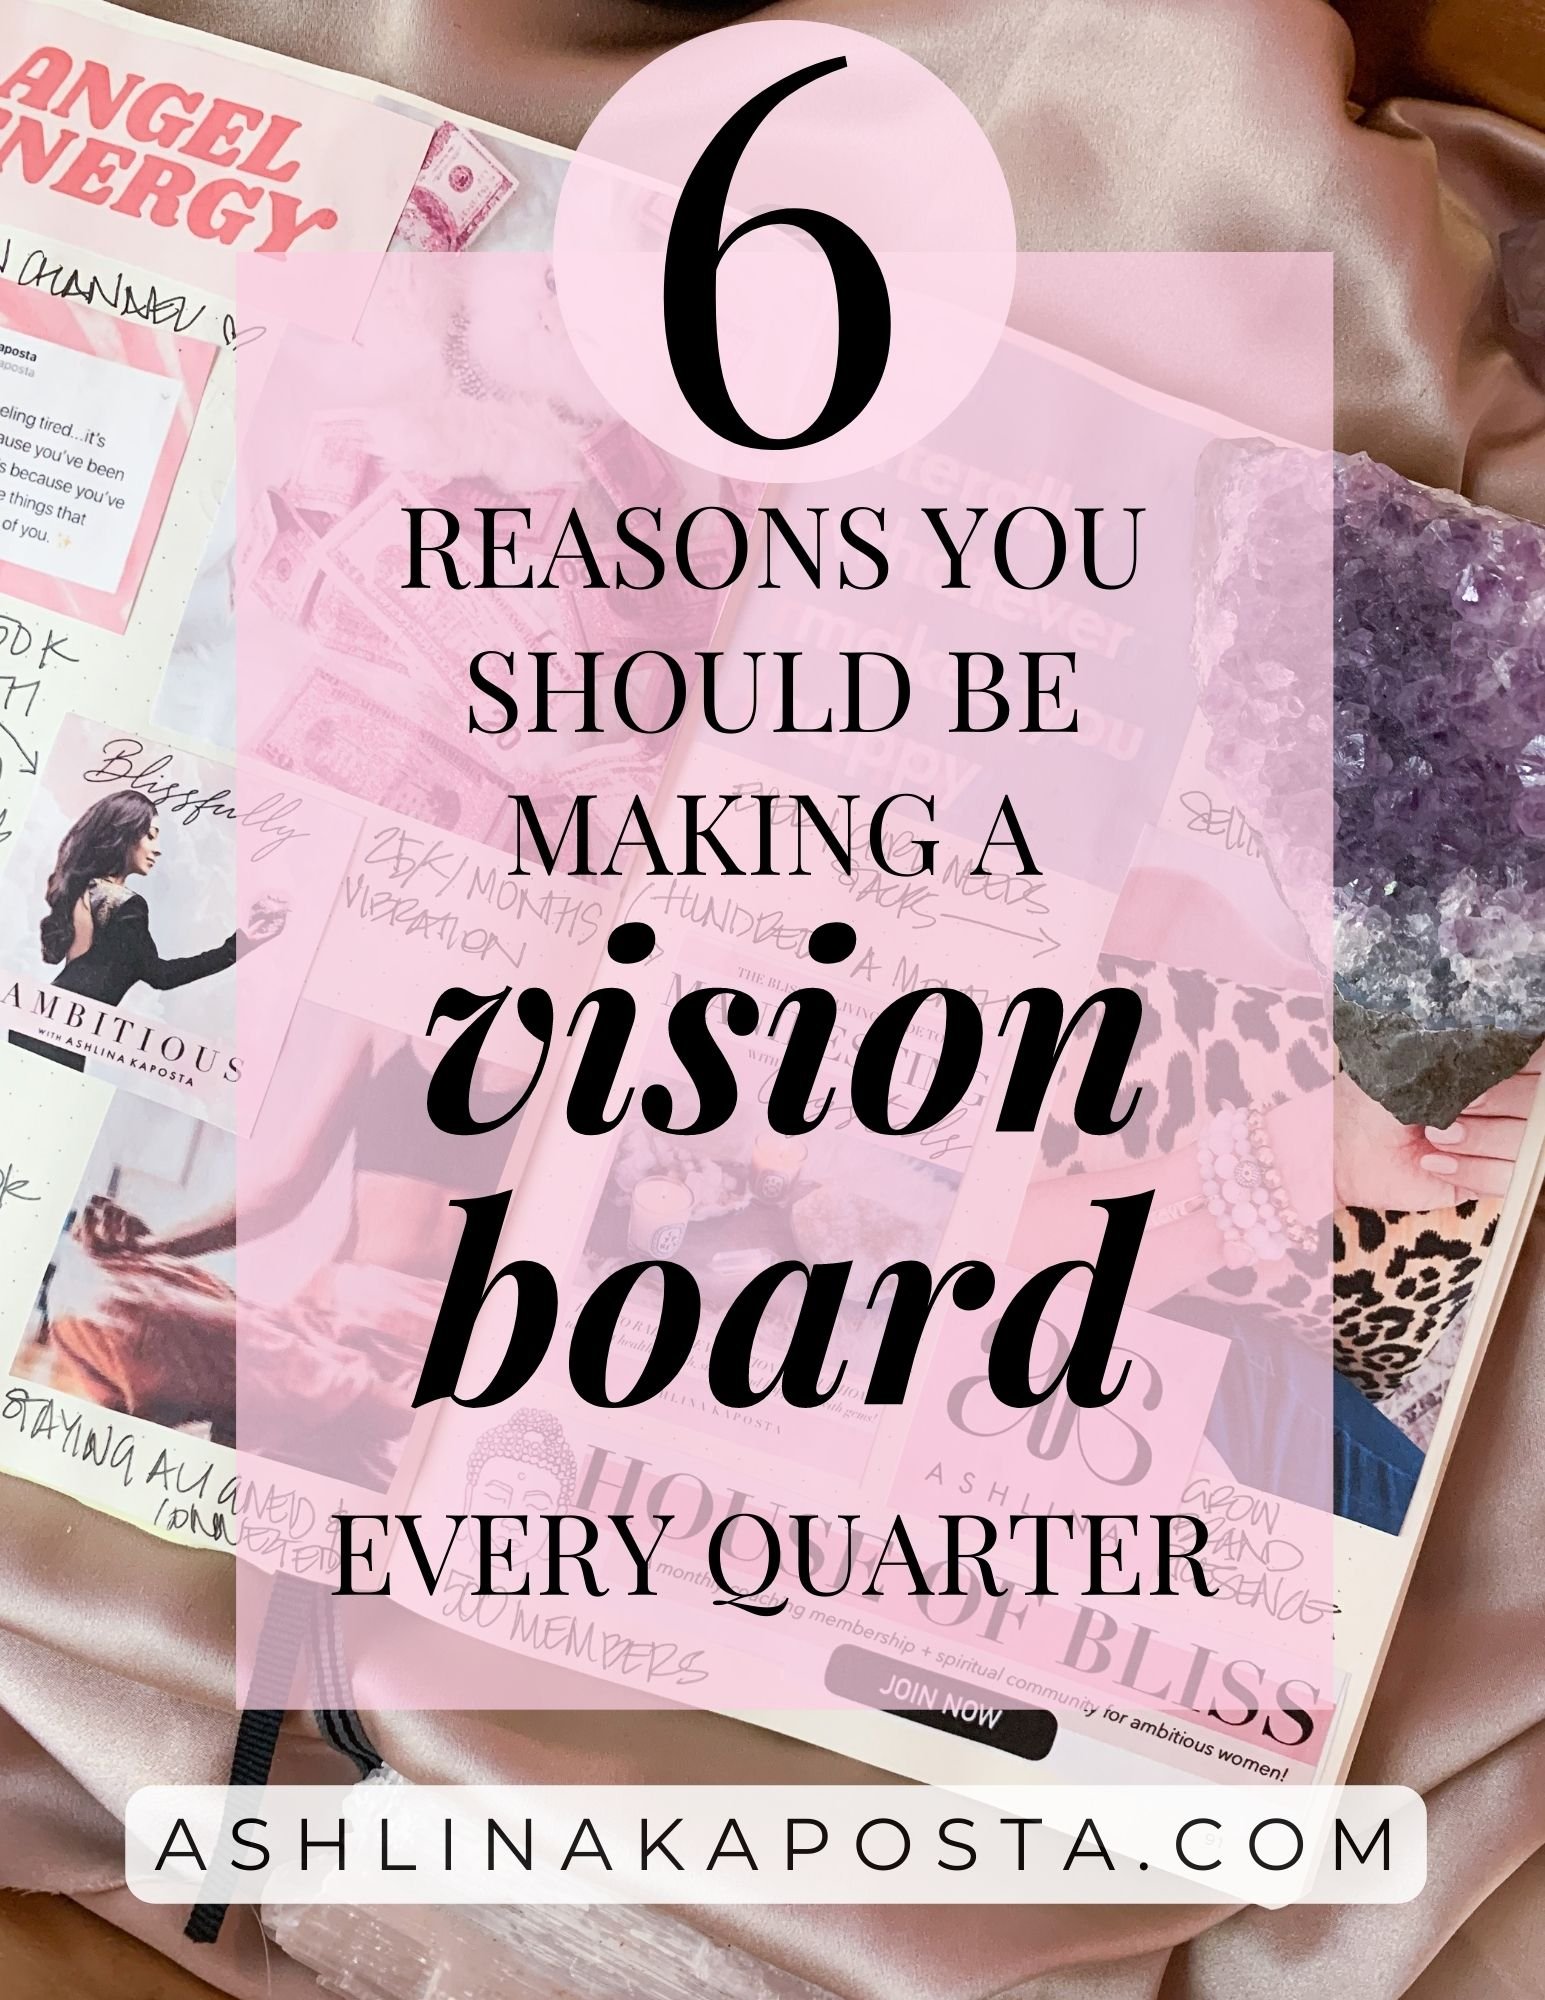 Vision Boards: Their Great Importance Why You Should Make One –